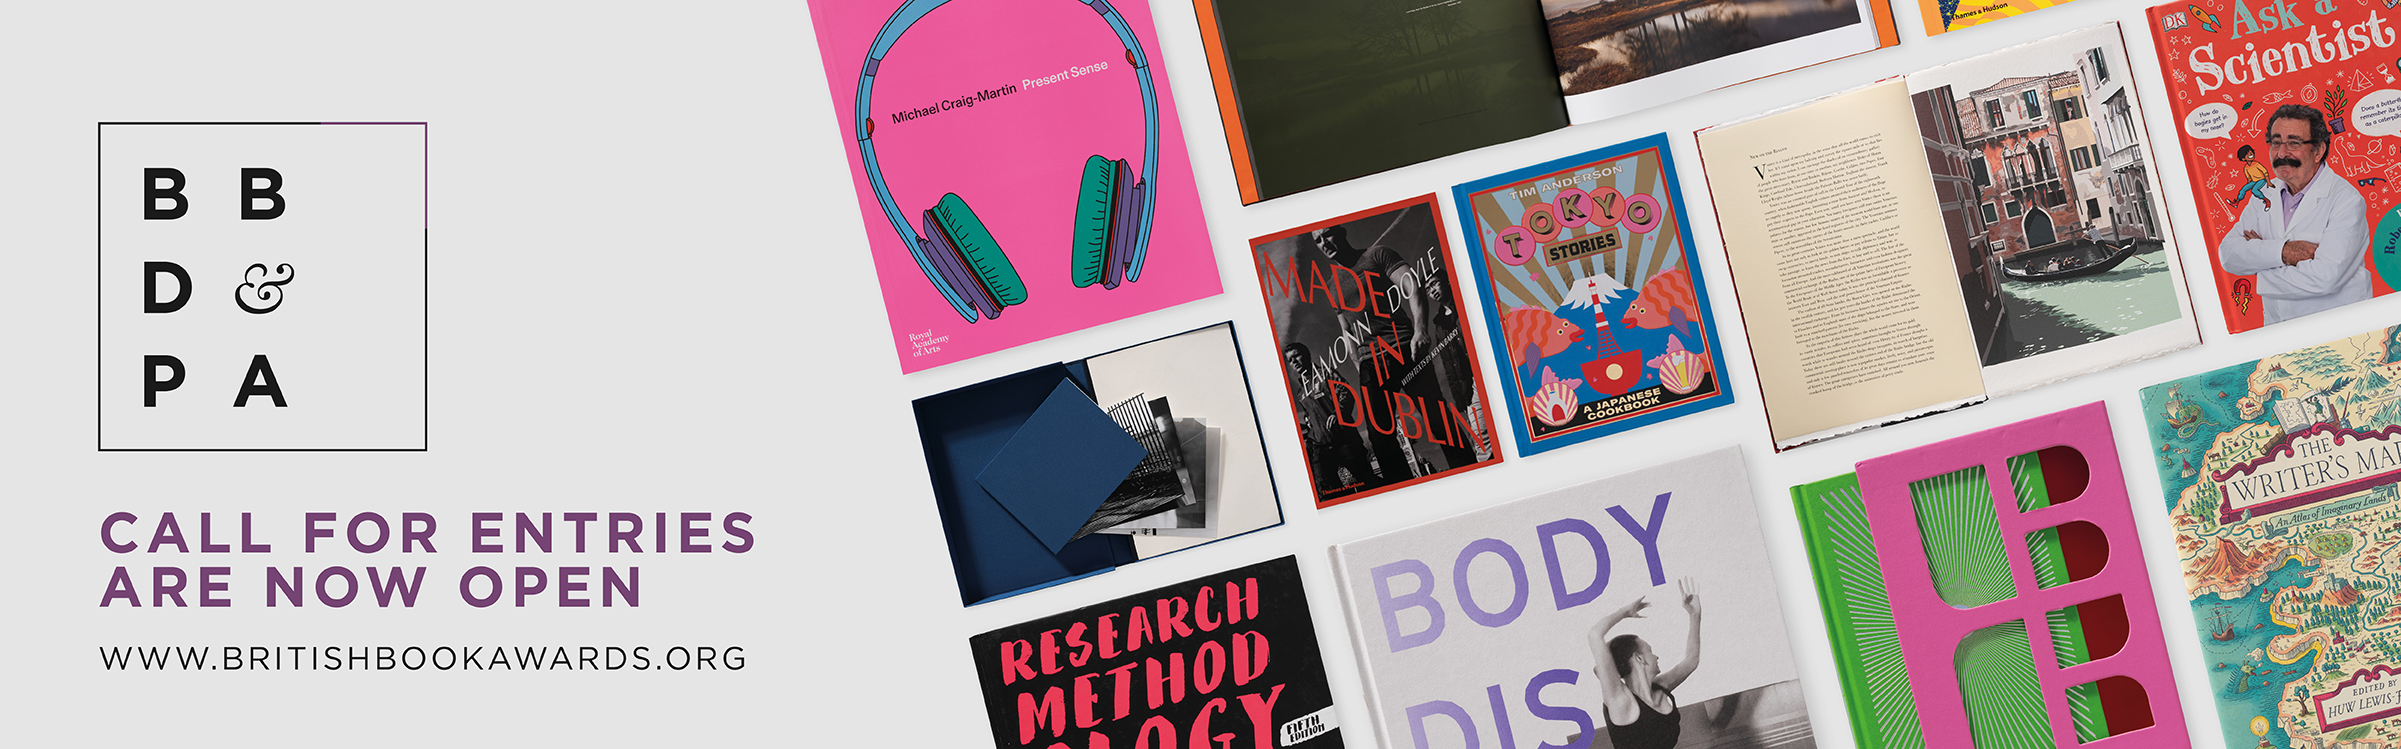 THE BPIF ARE CALLING FOR ENTRIES TO THE BRITISH BOOK DESIGN AND PRODUCTION AWARDS 